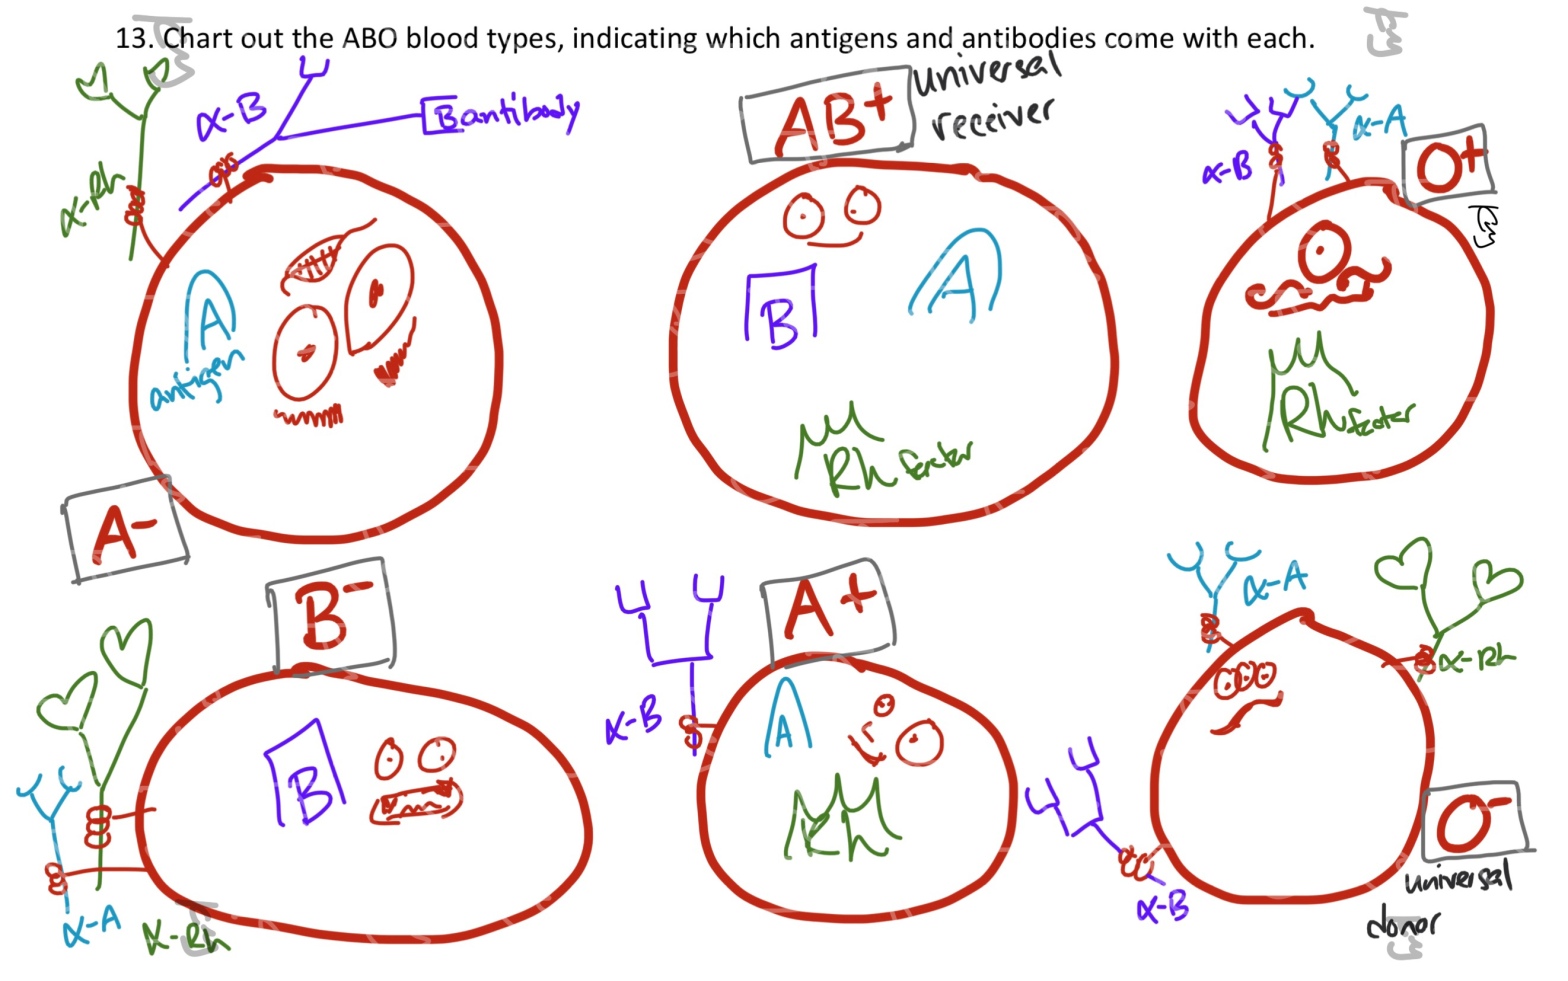 K8's humorous Line art cartoon drawing of the blood type chart showing antigens present and antibodies that could be formed